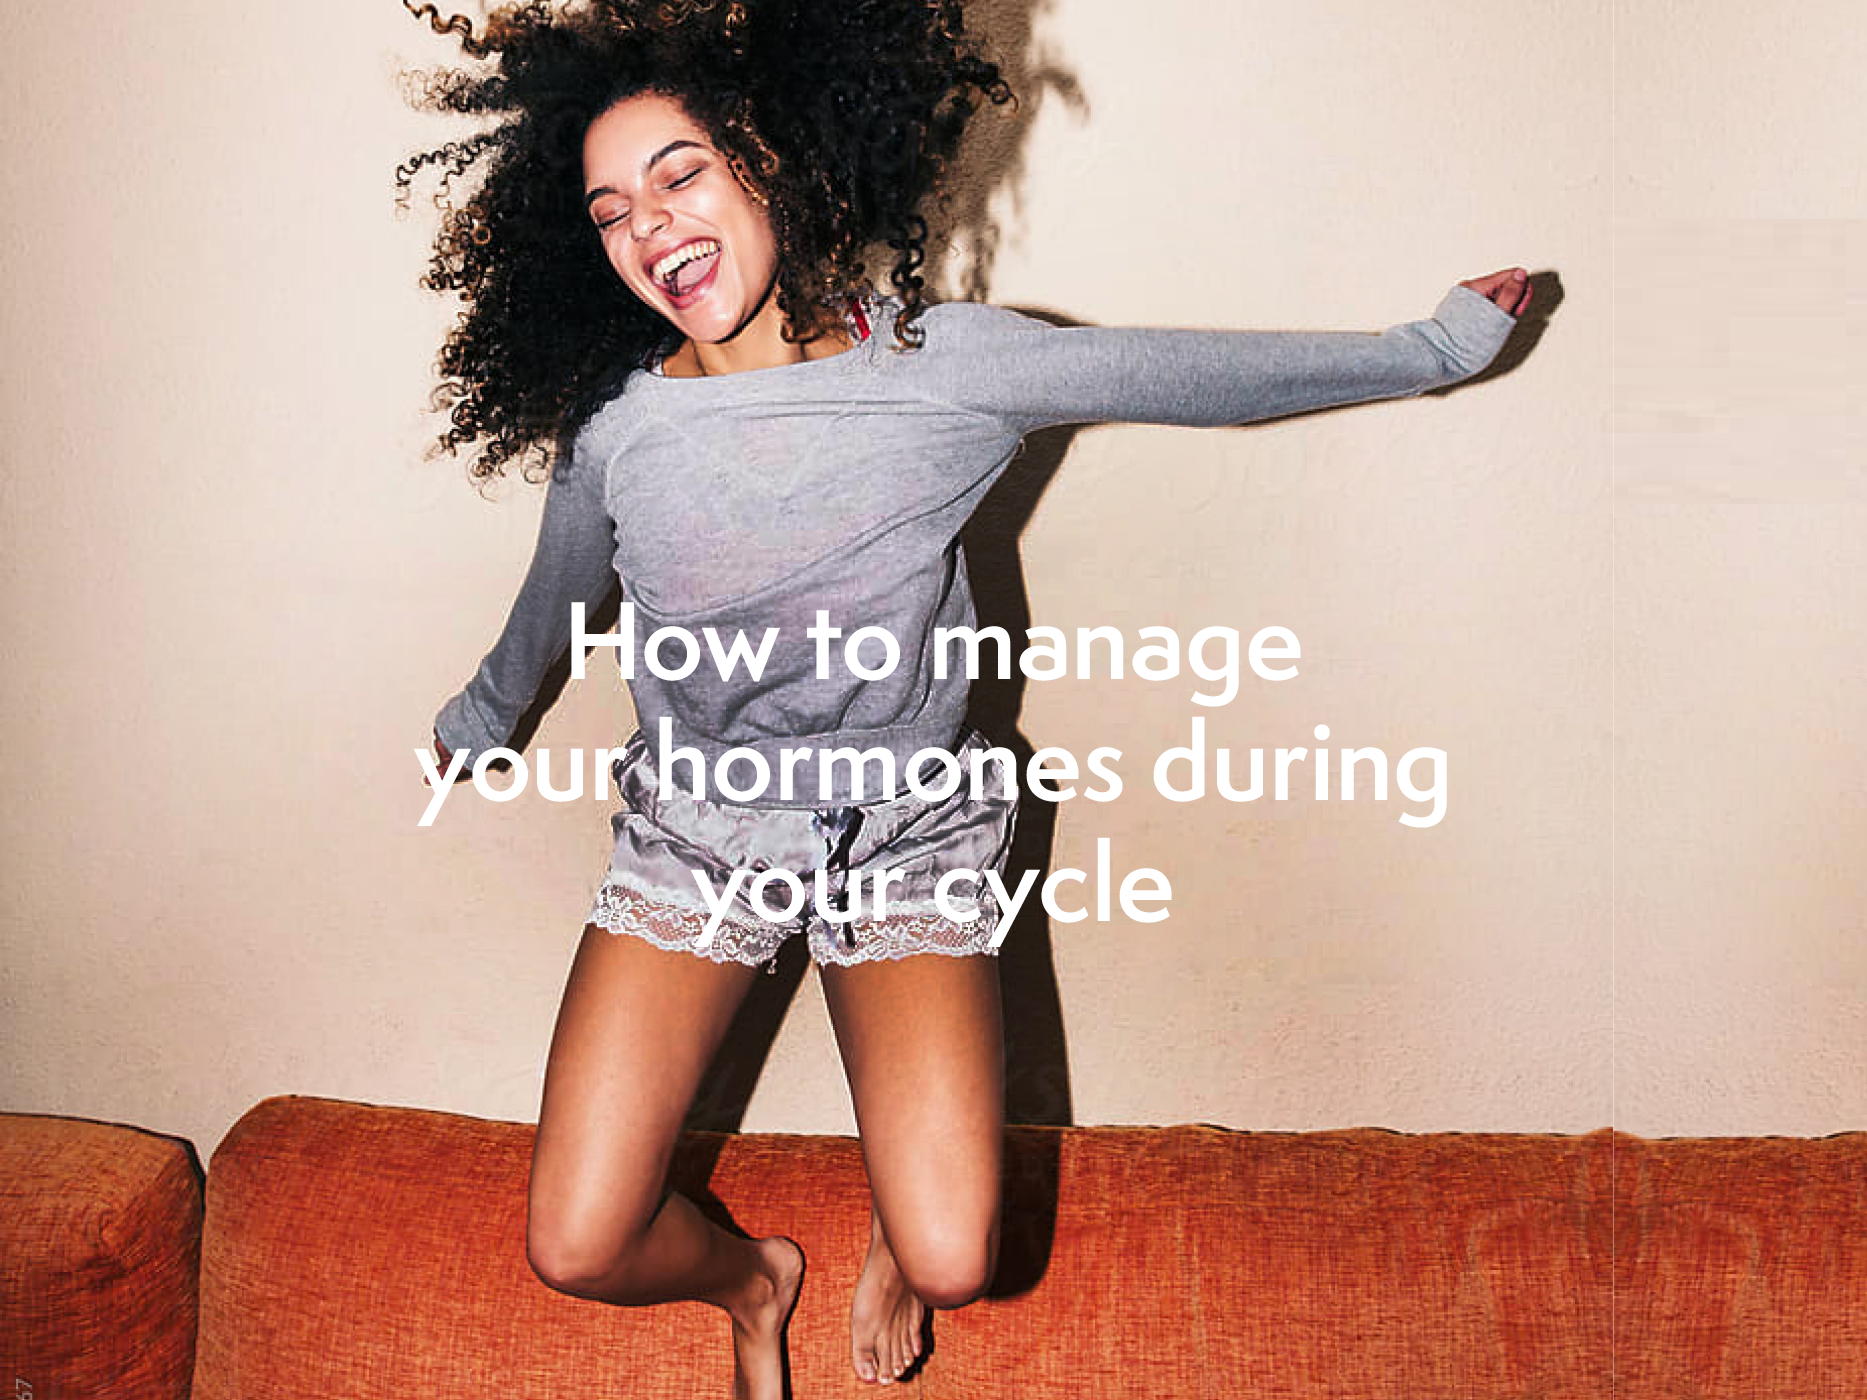 How to manage and harness your hormones during your cycle